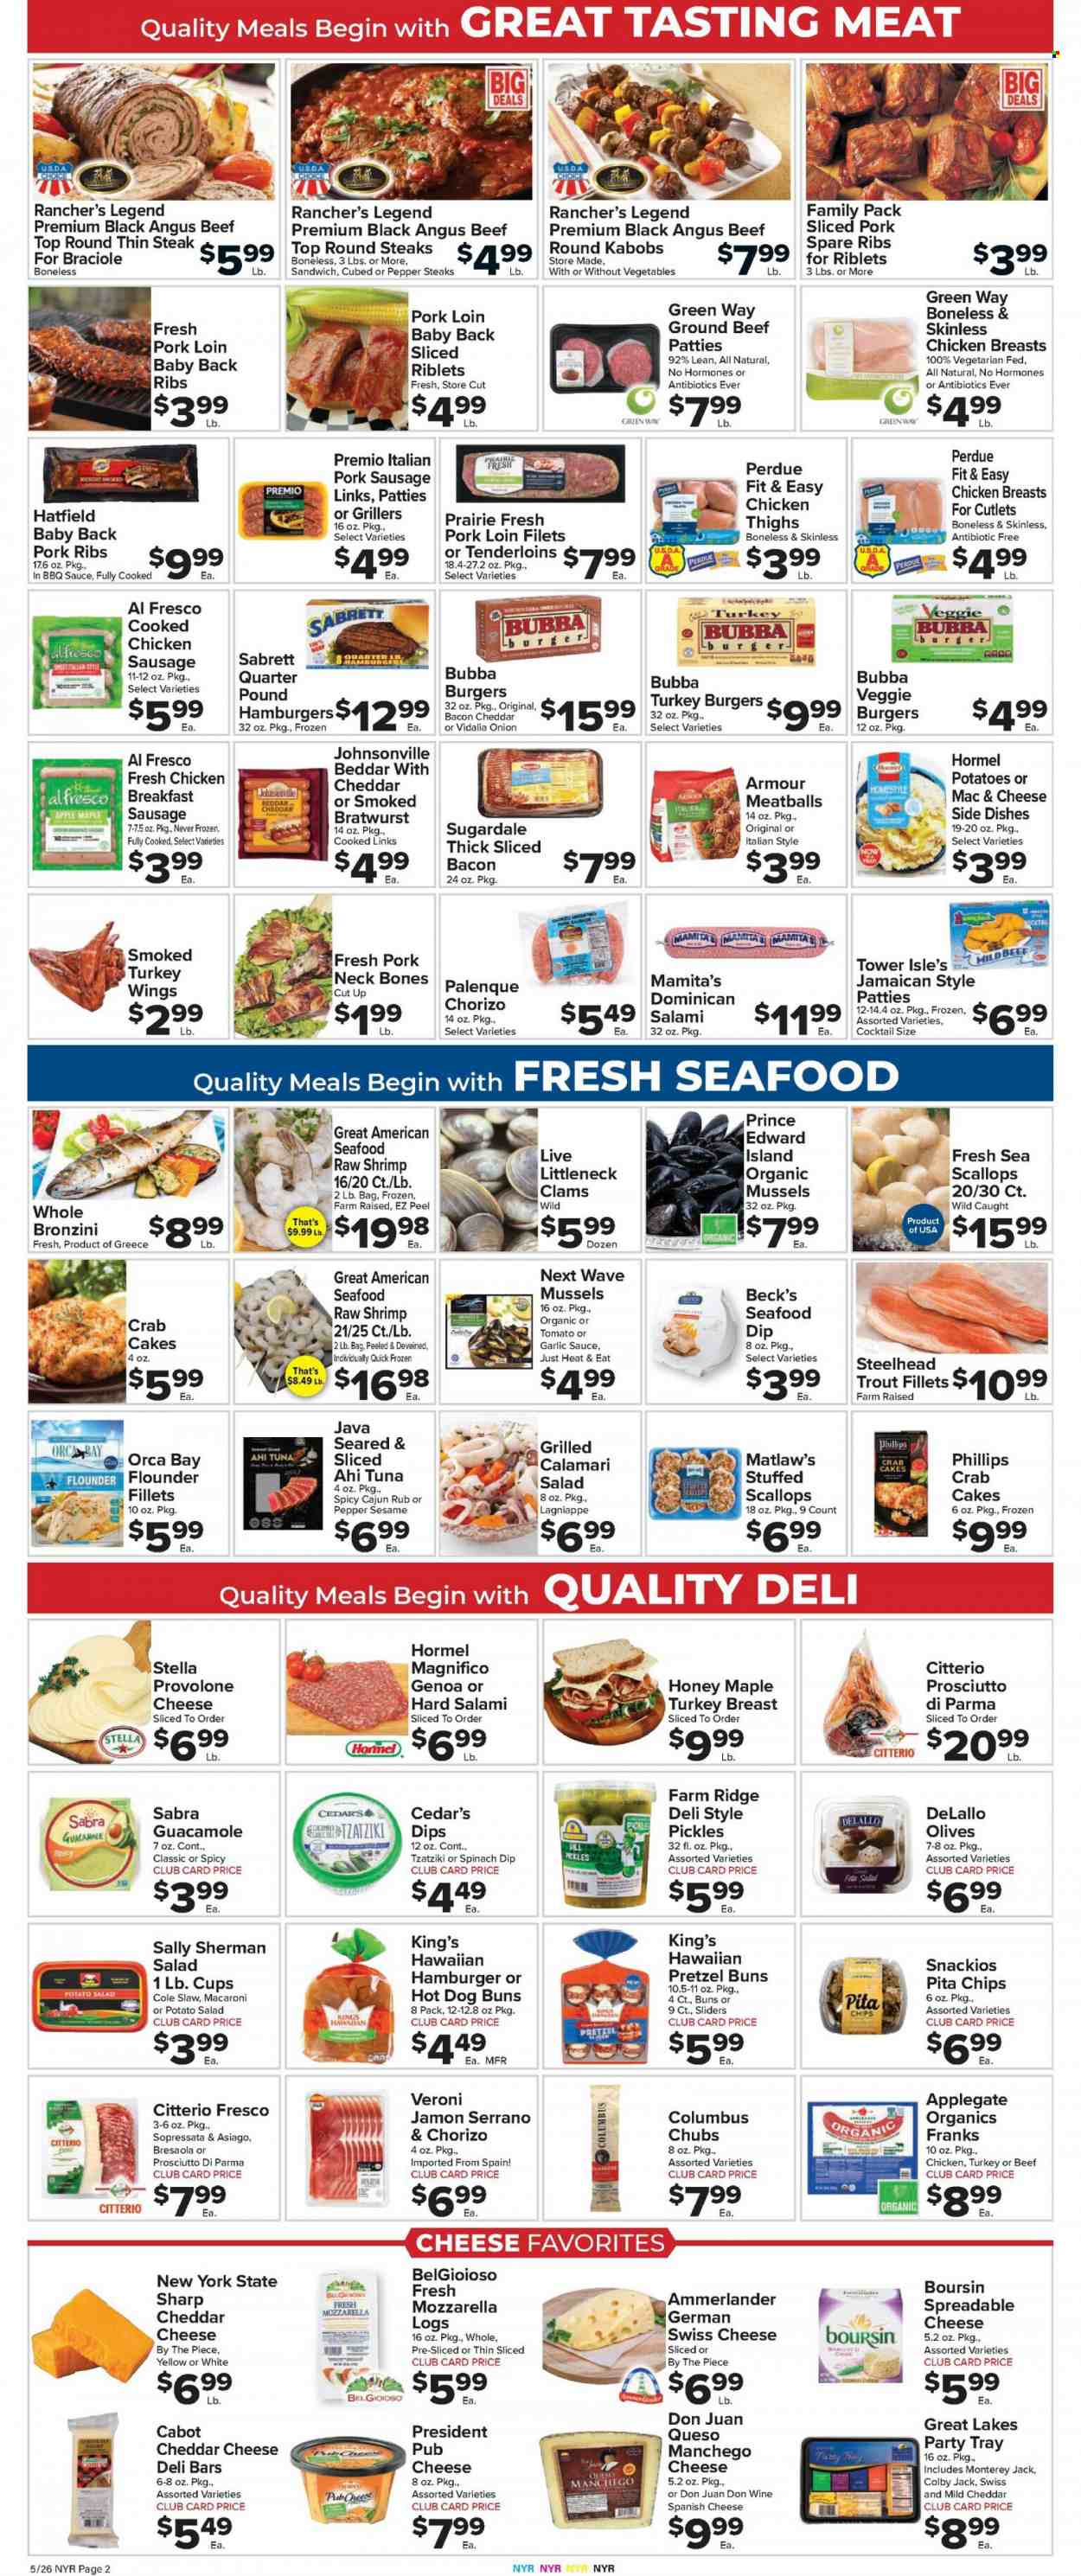 thumbnail - Foodtown Flyer - 05/26/2023 - 06/01/2023 - Sales products - pretzels, potatoes, onion, salad, calamari, clams, fish fillets, flounder, mussels, scallops, trout, tuna, seafood, shrimps, Orca Bay, crab cake, meatballs, macaroni, sauce, veggie burger, Perdue®, Hormel, Sugardale, bacon, salami, prosciutto, Johnsonville, Jamón Serrano, dry-cured ham, bratwurst, sausage, pork sausage, chicken sausage, frankfurters, tzatziki, guacamole, potato salad, asiago, Colby cheese, Manchego, mild cheddar, Monterey Jack cheese, mozzarella, swiss cheese, pub cheese, Président, feta, Provolone, dip, spinach dip, pita chips, pickles, olives, dill, garlic sauce, honey, alcohol, beer, Beck's, turkey breast, chicken breasts, chicken thighs, turkey wings, turkey, beef meat, ground beef, steak, ribs, turkey burger, pork loin, pork meat, pork ribs, pork spare ribs, pork back ribs, WAVE, cup. Page 4.